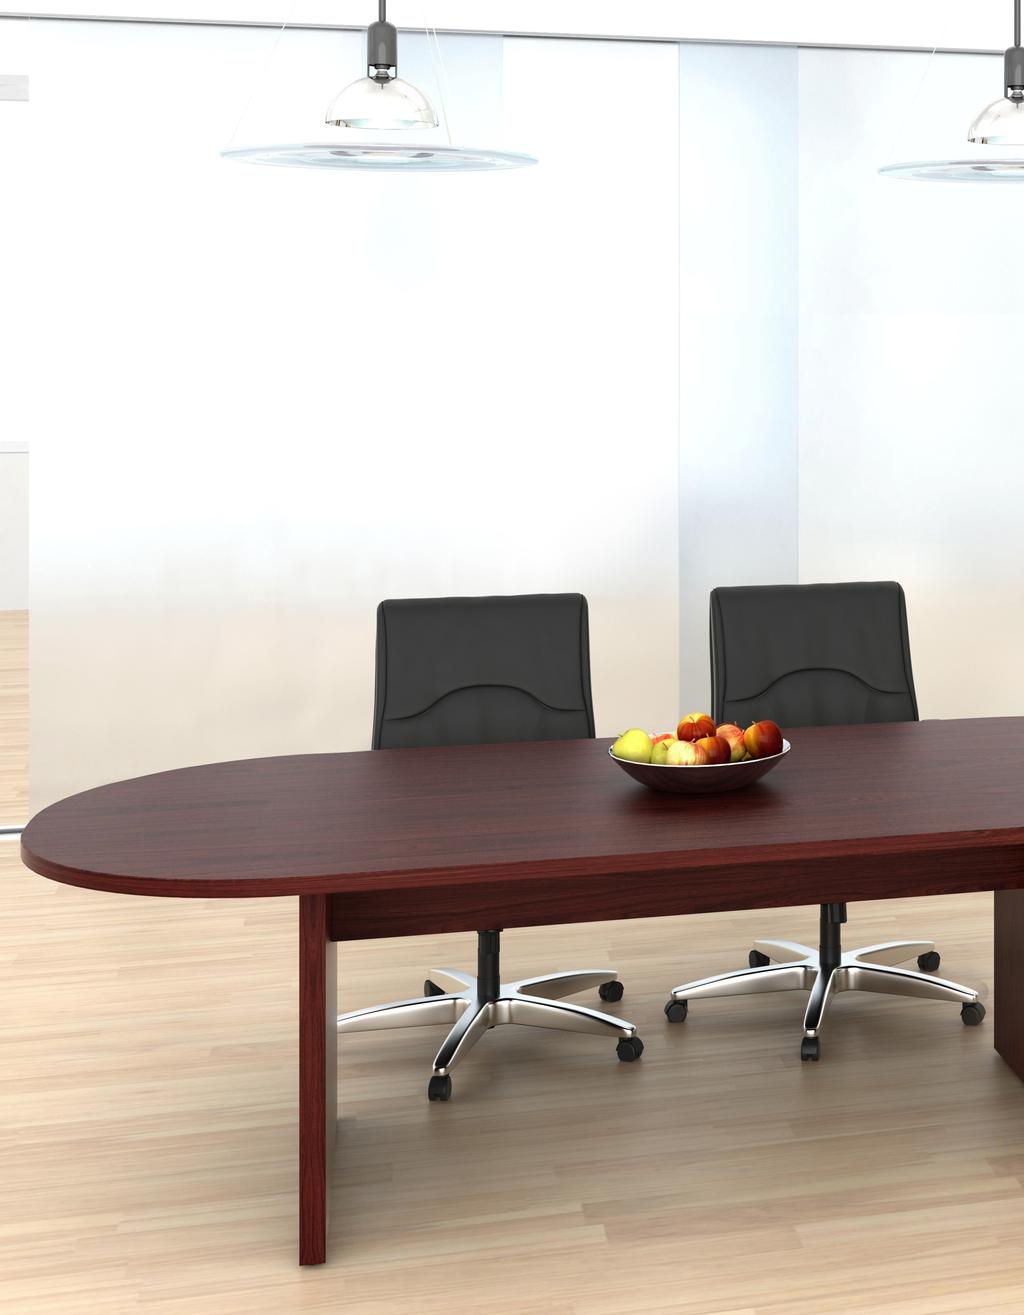 CONFERENCE LET S GET TOGETHER Select from coordinating conference tables and accessories to create accommodating meeting rooms.